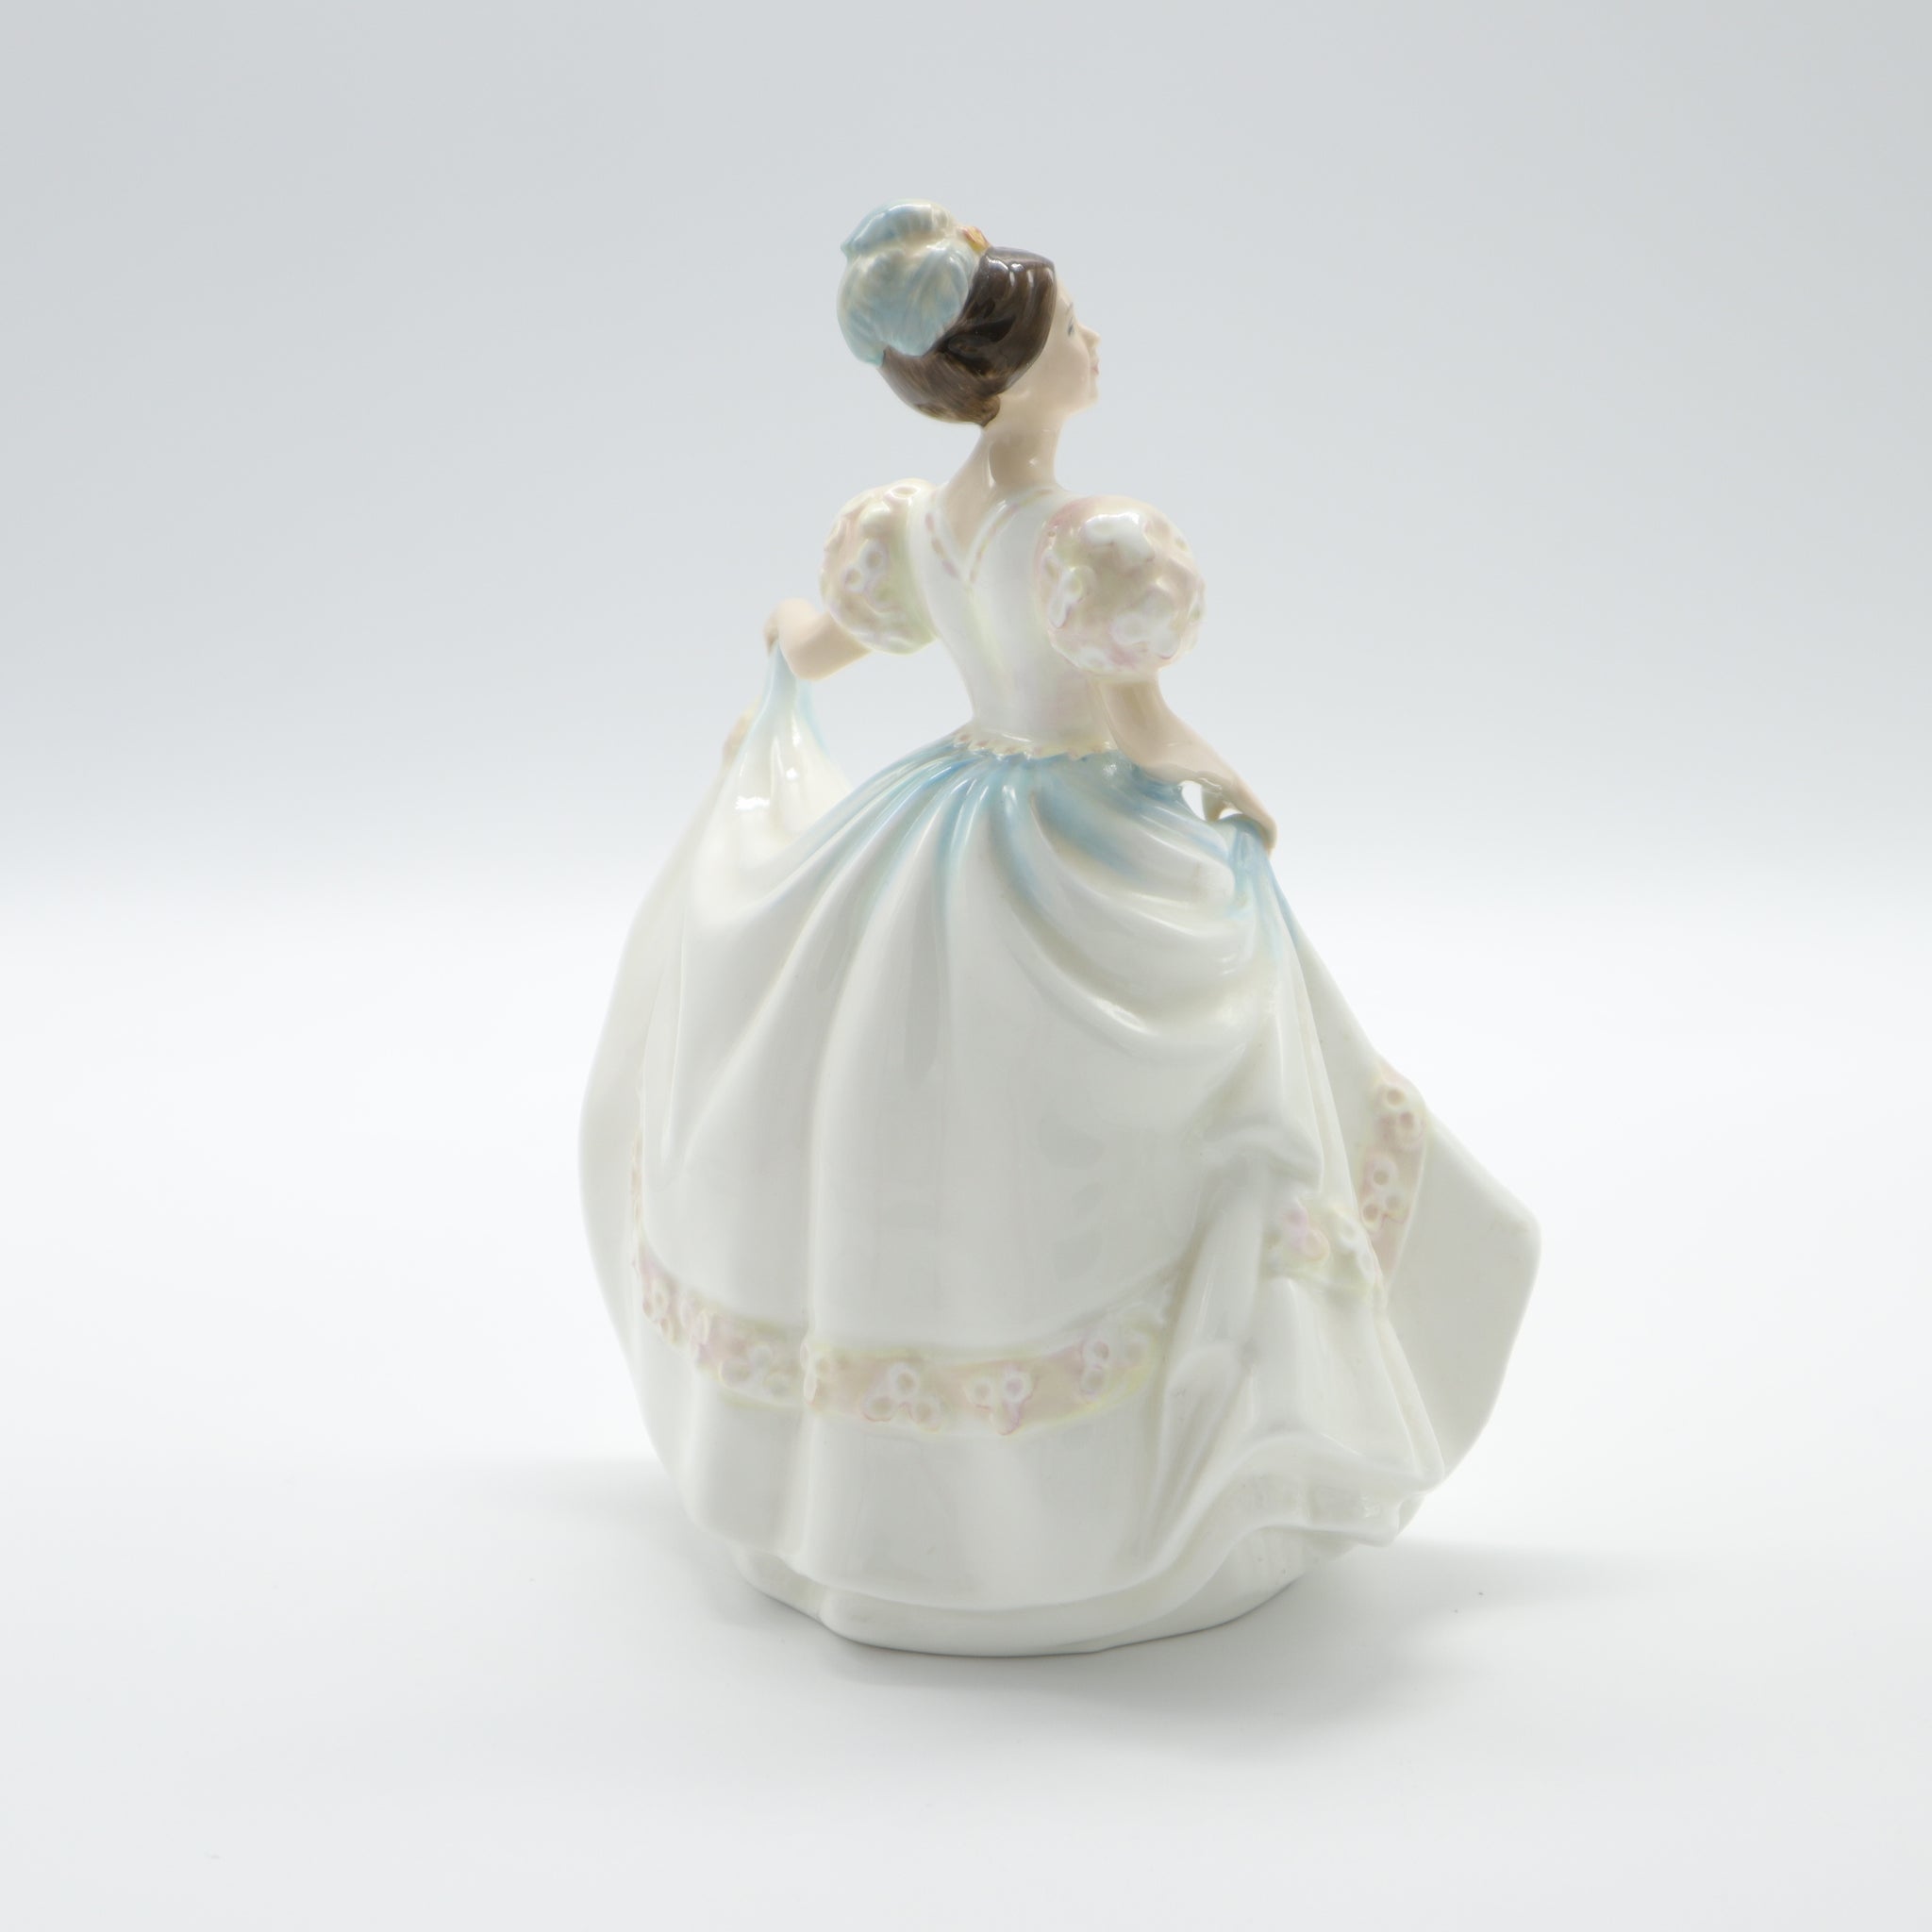 Sold at Auction: ROYAL DOULTON LIGHT OUT FIGURINE HM4465 + ROYAL